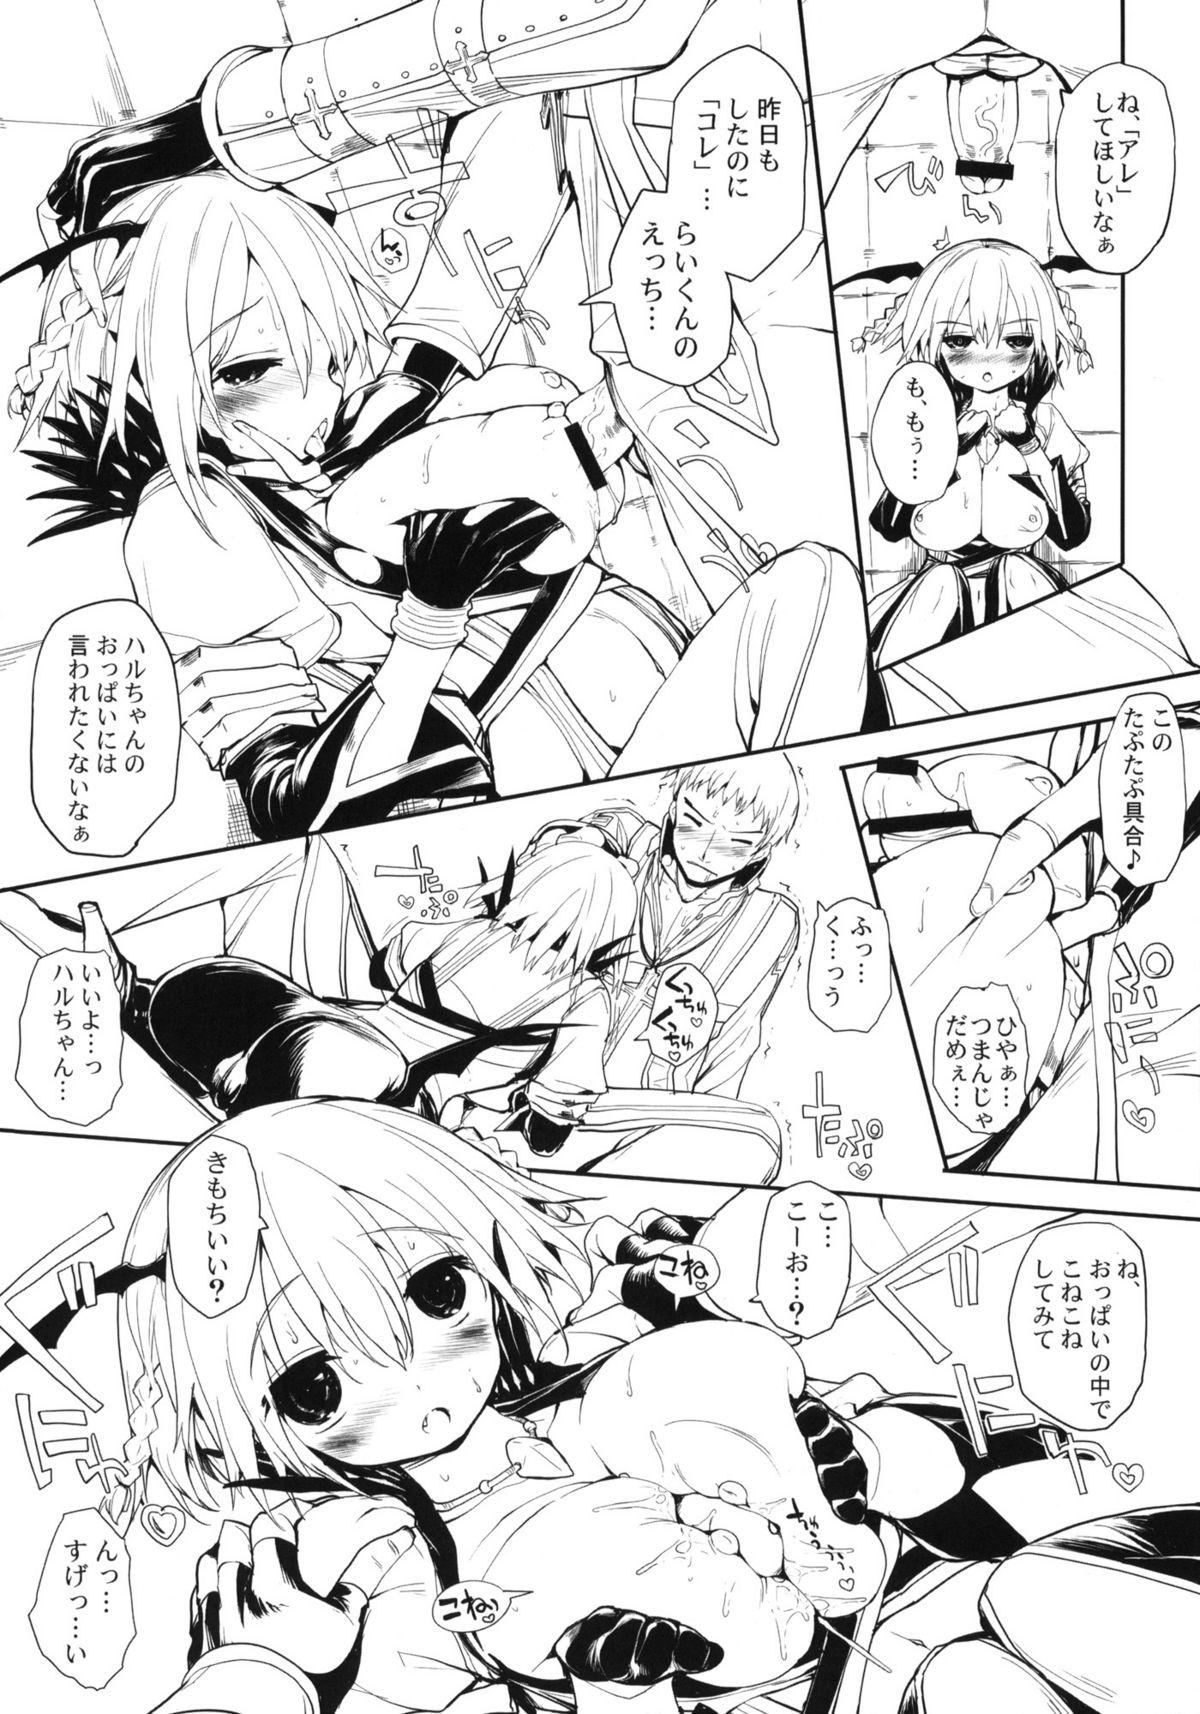 Tiny Tits COMIC RO PREVIEW - Ragnarok online Cheating - Page 5